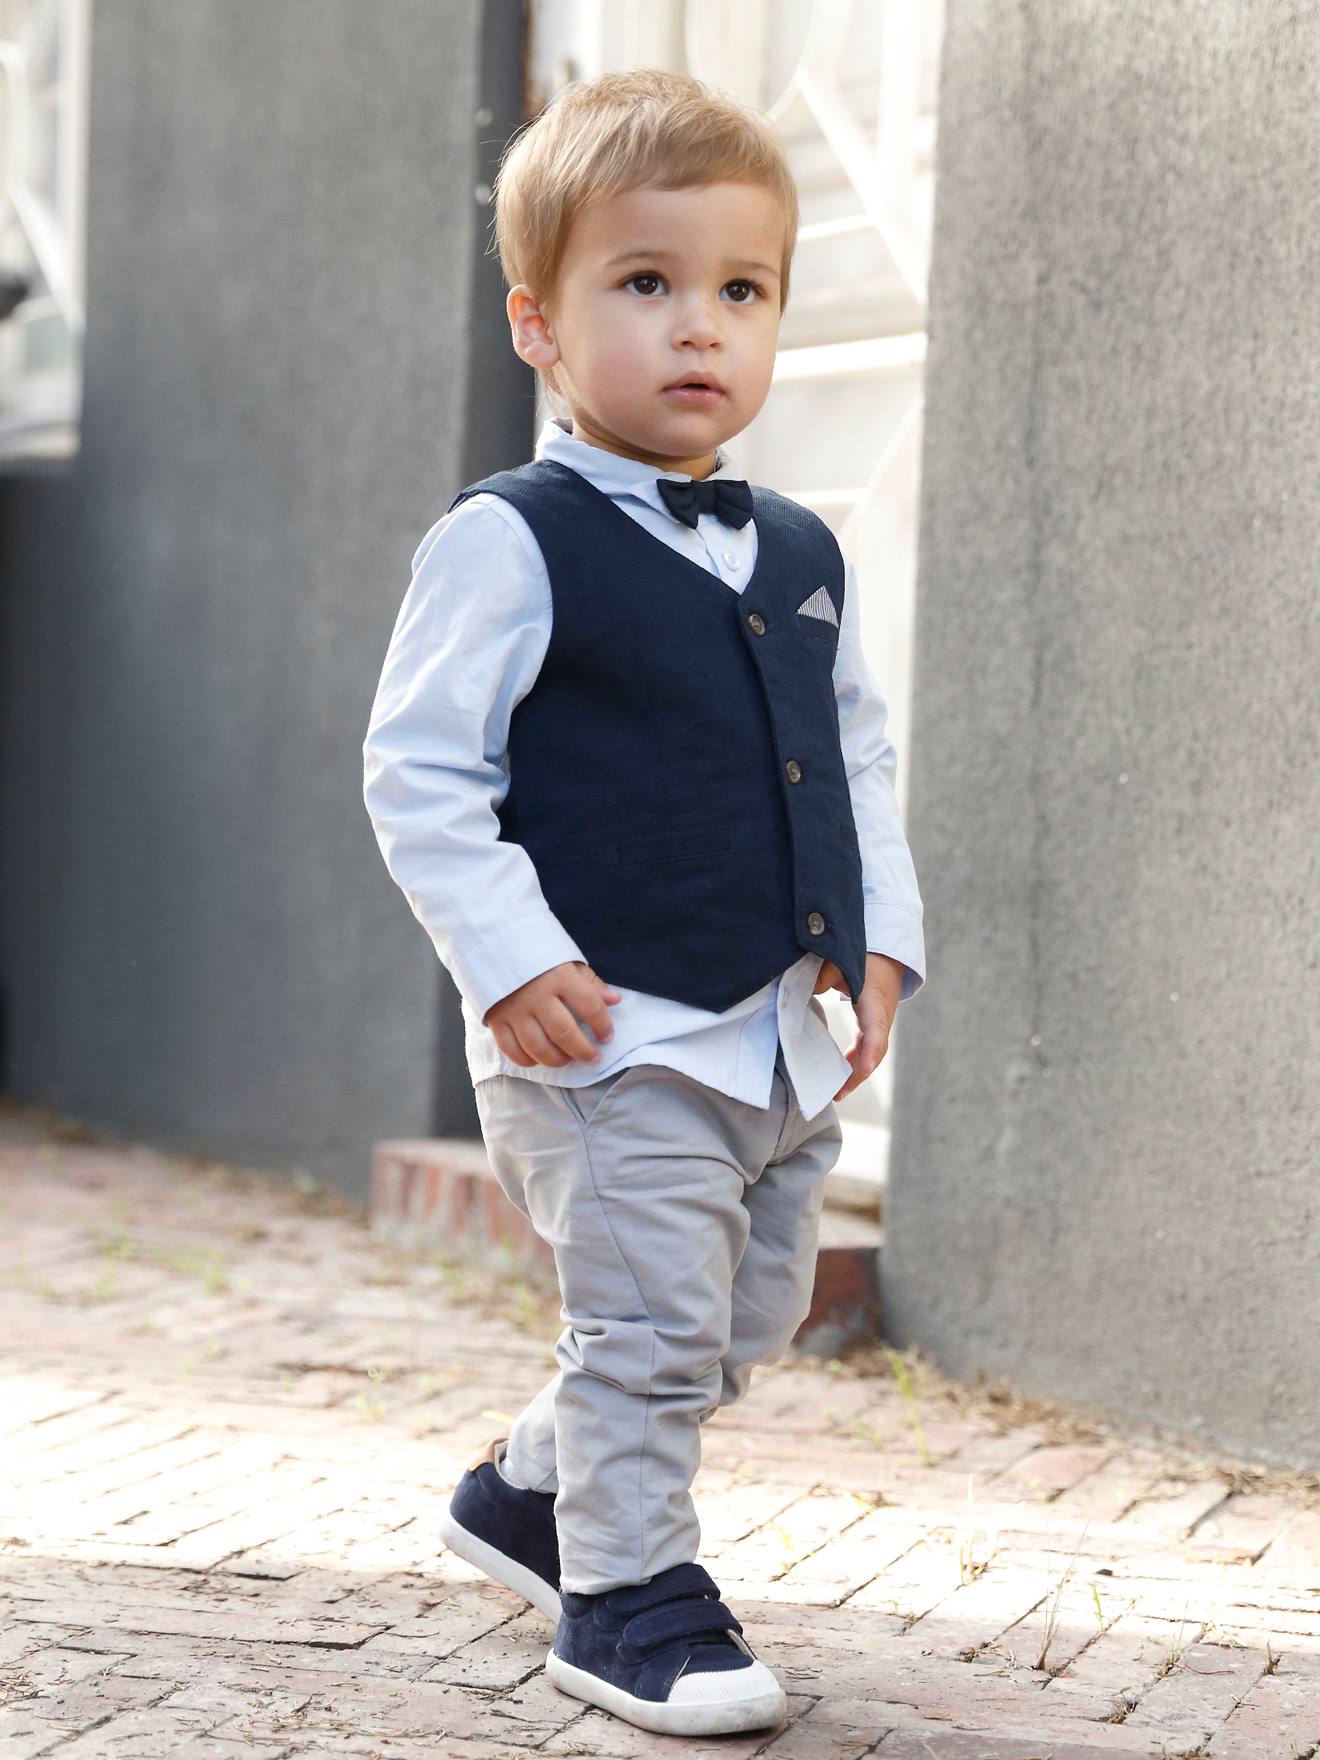 Occasion Wear Outfit : Waistcoat + Shirt + Bow Tie + Trousers, for Boys dark blue